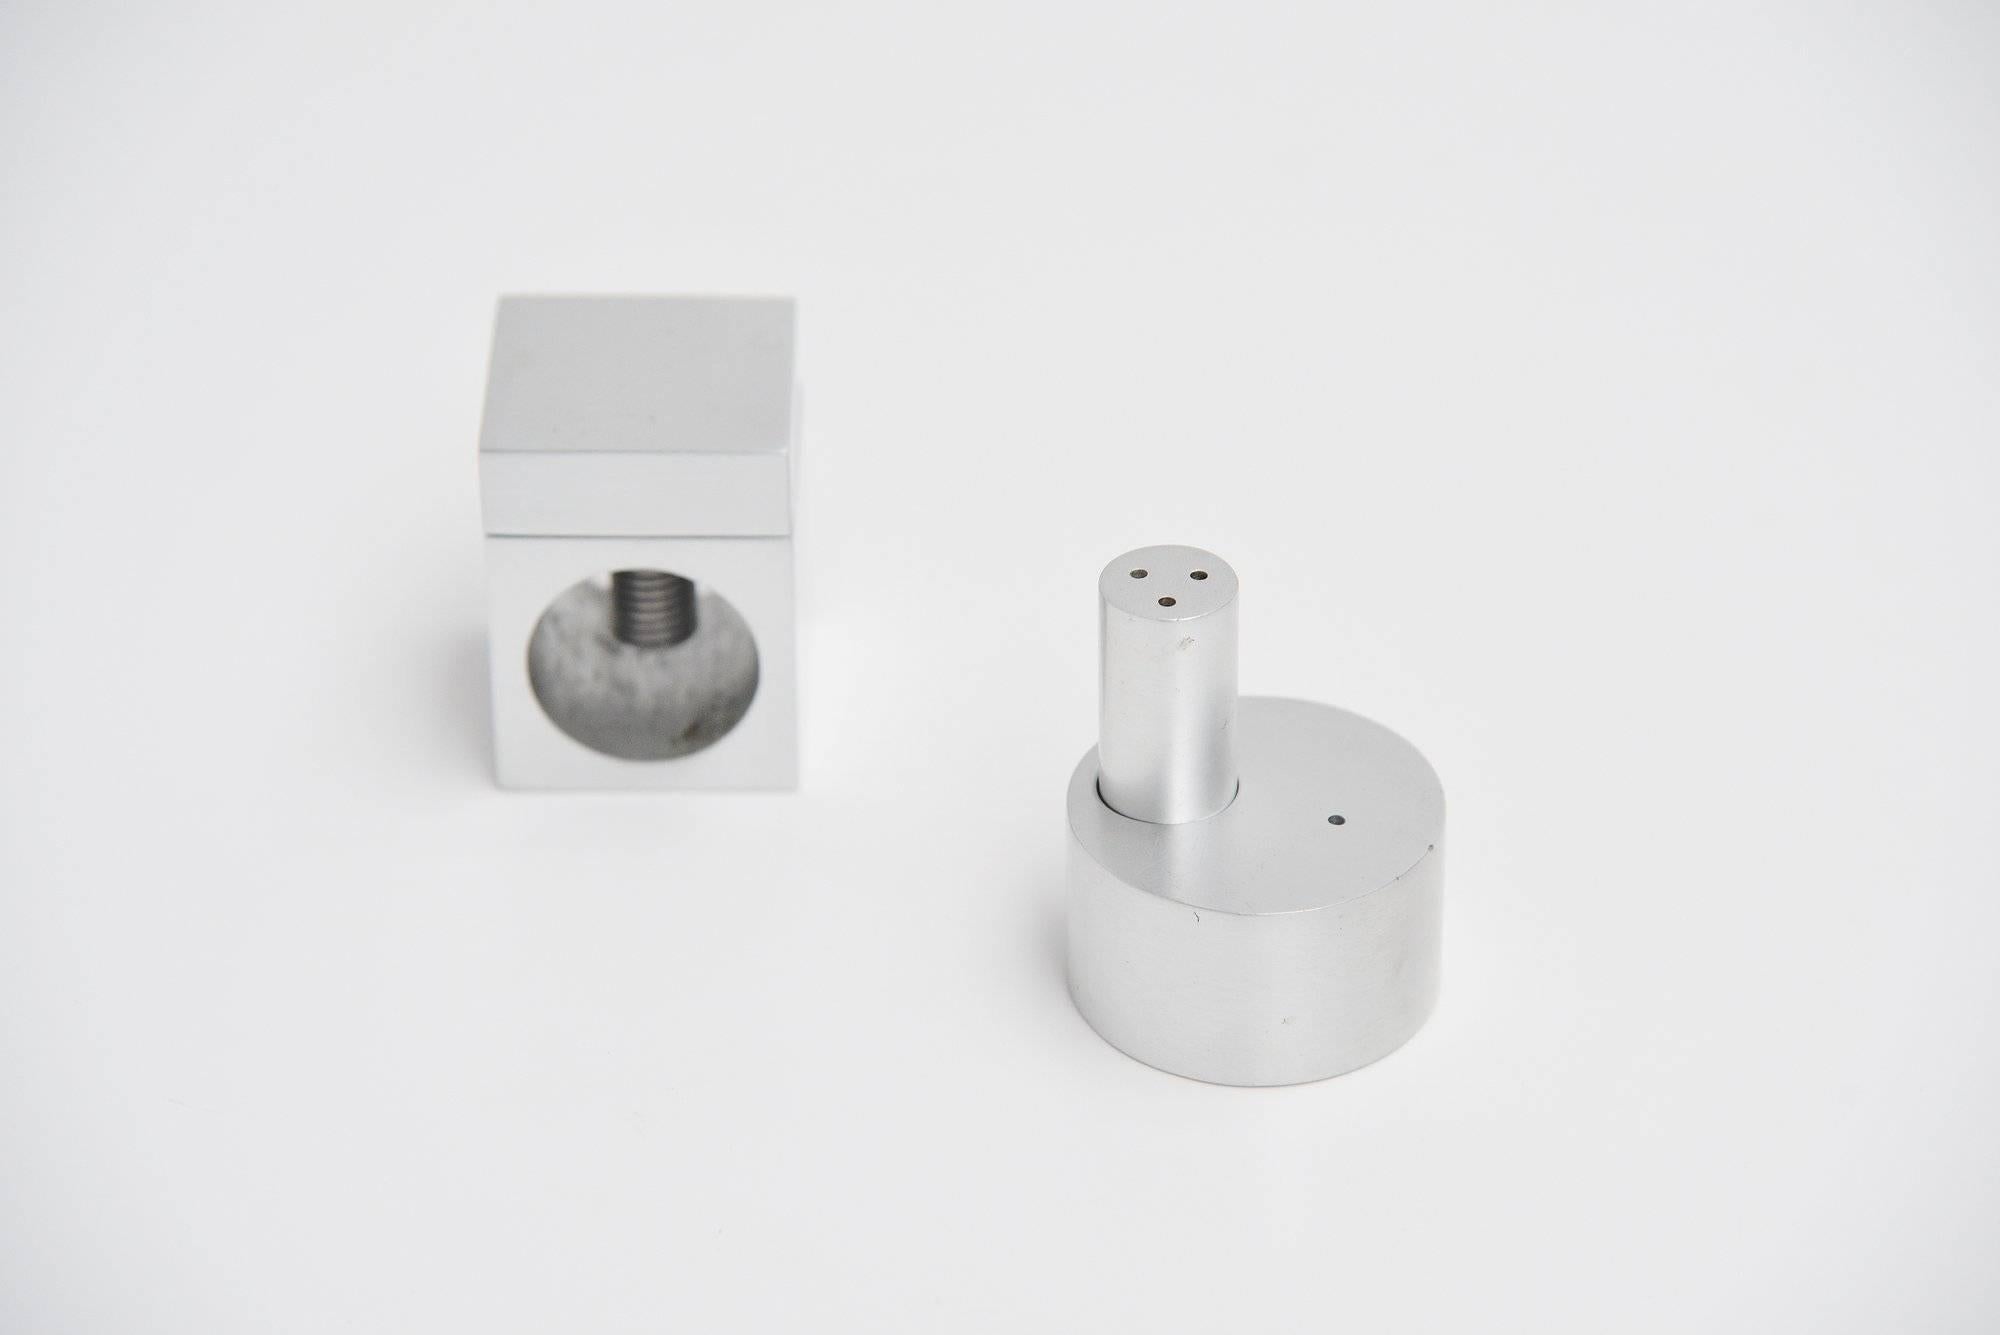 Very nice set of pepper and salt, and a nut cracker designed by Pierre Vandel for Espace de Pierre Cardin, Paris, 1970. These items are made of solid aluminum and are fantastically shaped and useful as well. The pepper and salt especially the nut